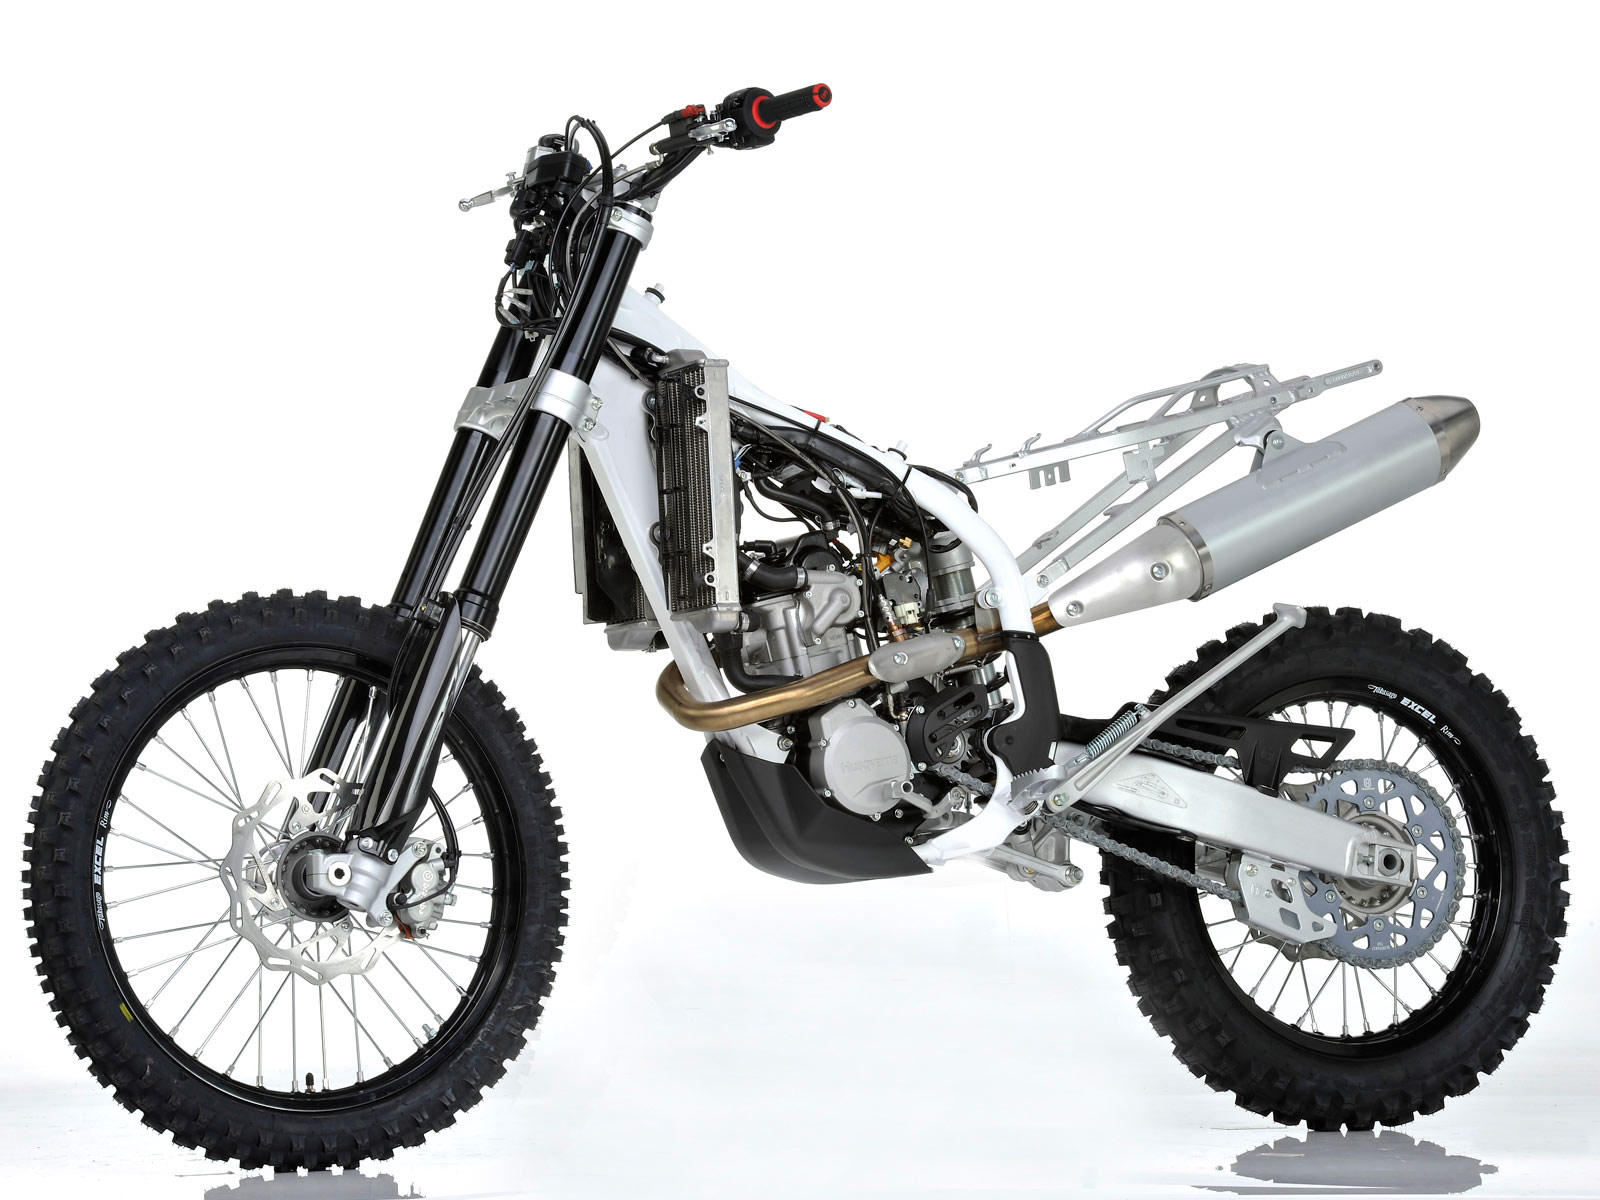 The new TE310 boasts the lightest engine in the 250 cc 4-stroke ...